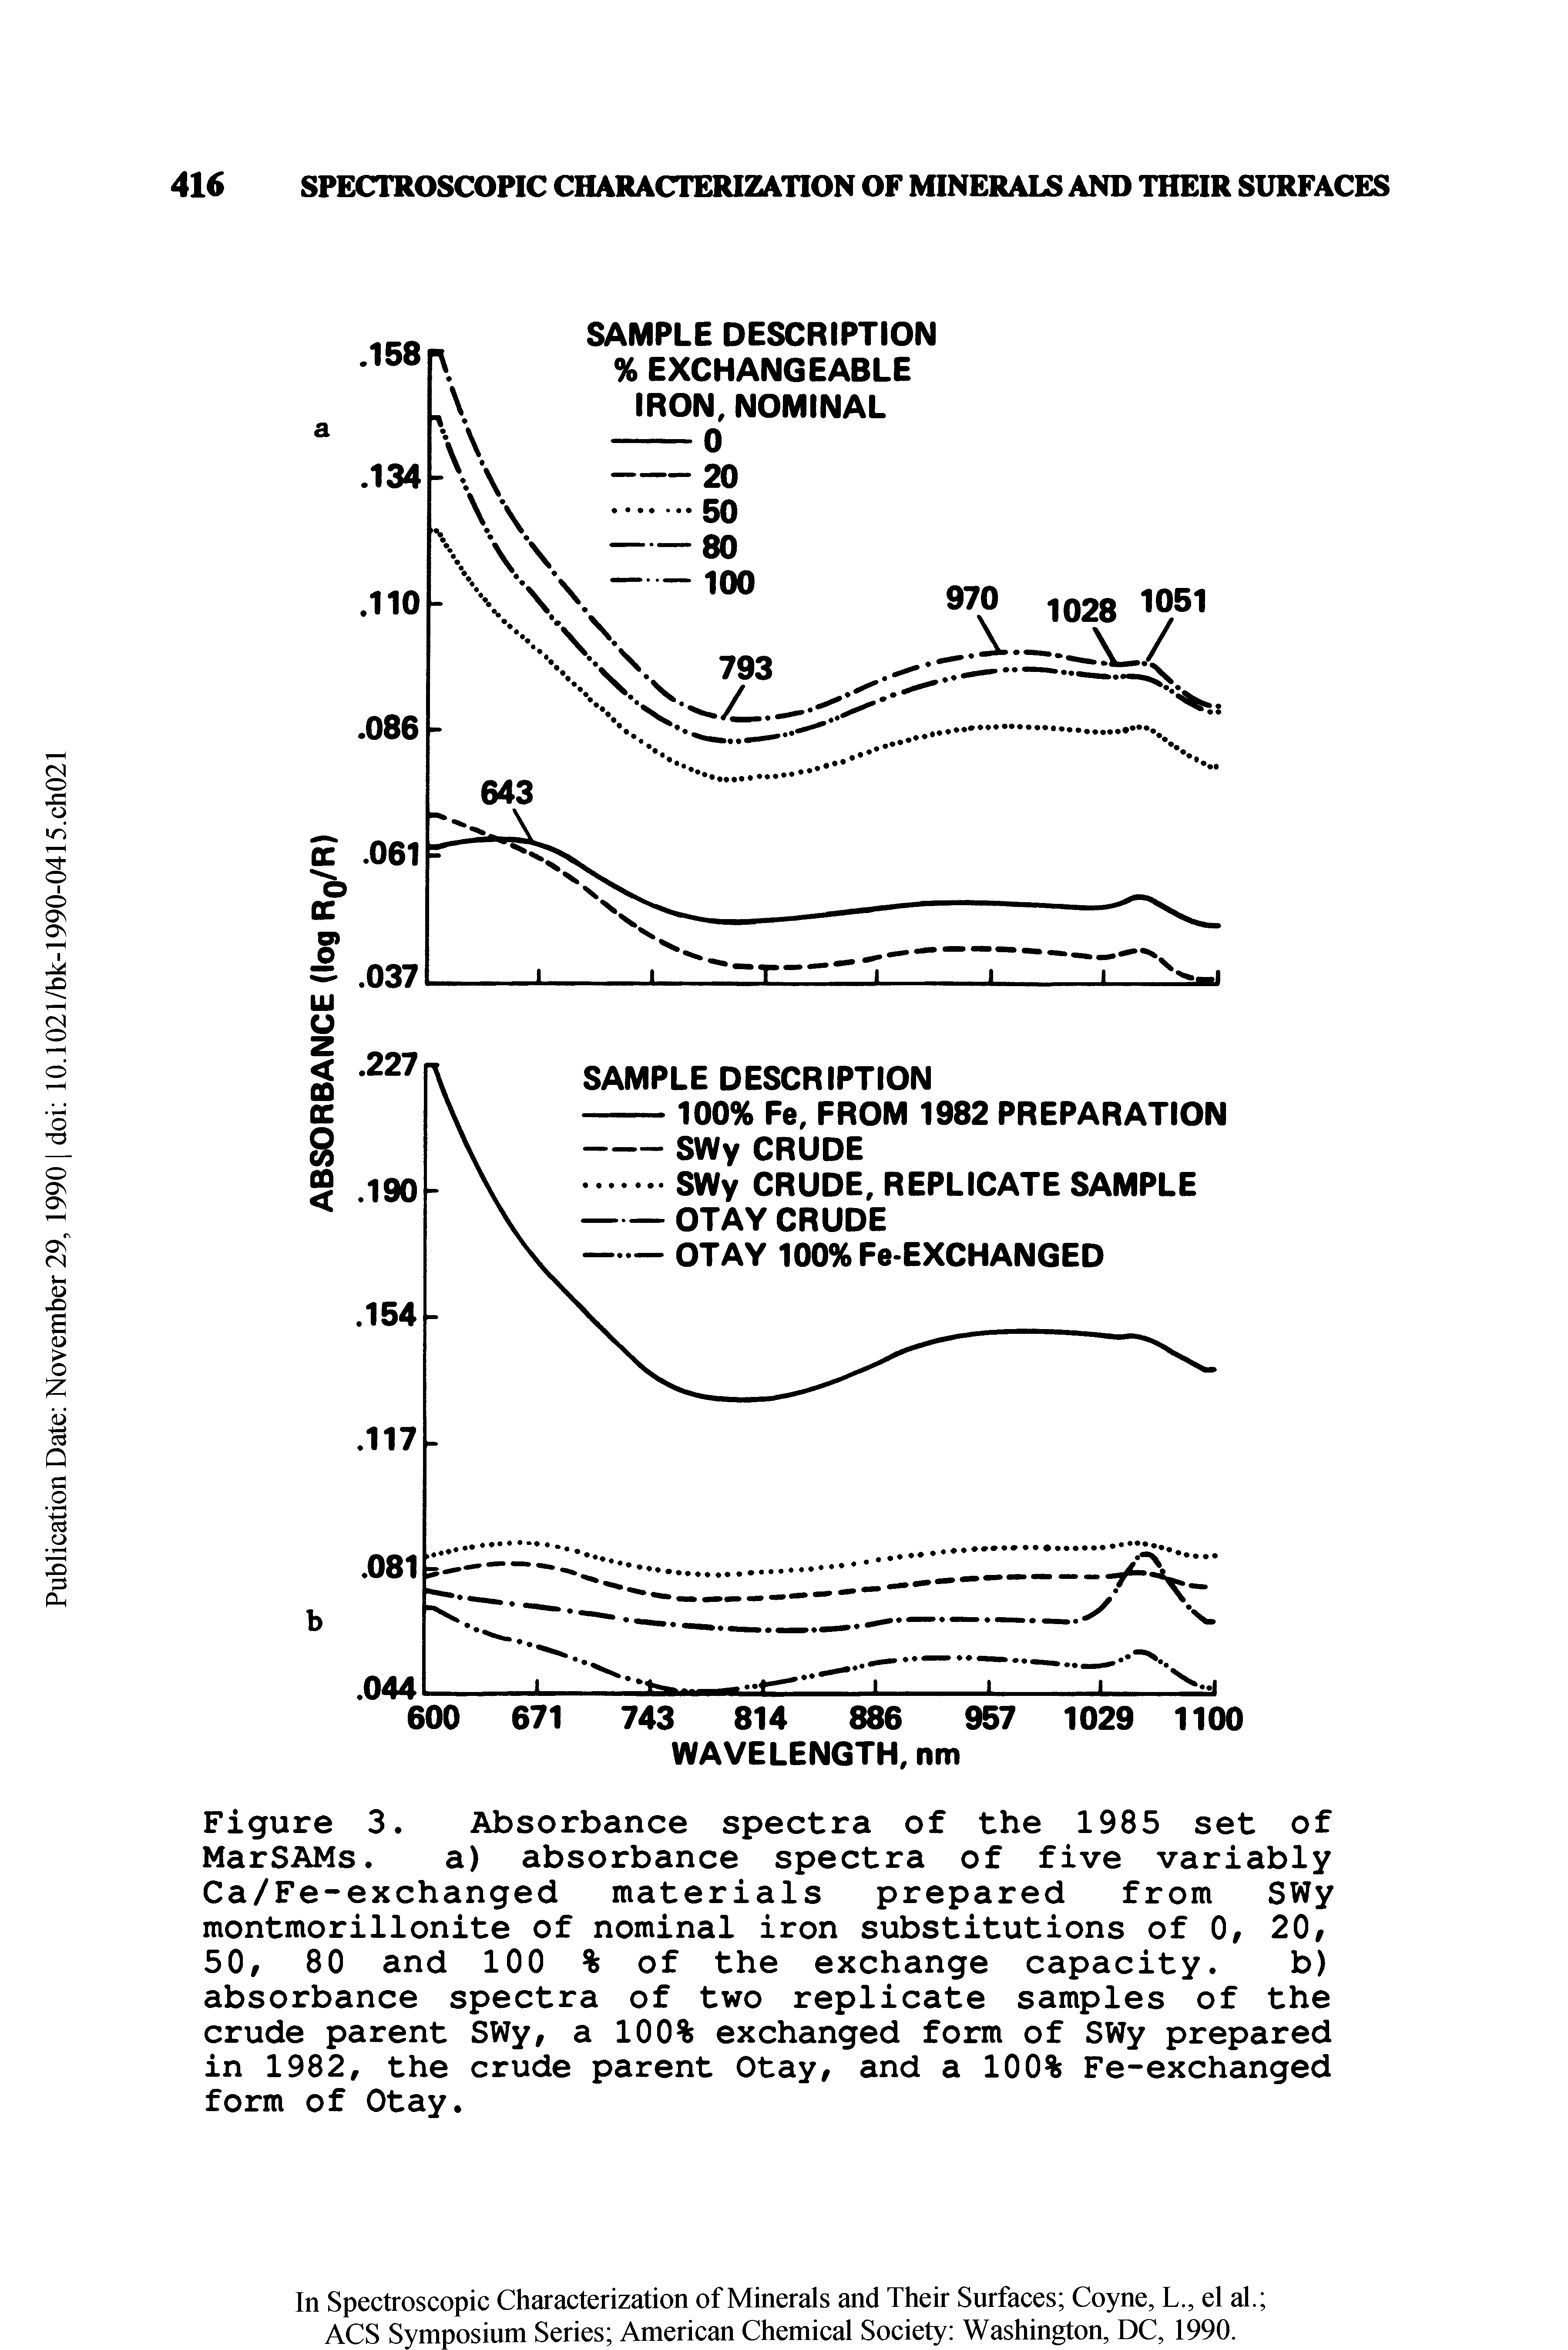 Figure 3. Absorbance spectra of the 1985 set of MarSAMs. a) absorbance spectra of five variably Ca/Fe-exchanged materials prepared from SWy montmorillonite of nominal iron substitutions of 0, 20, 50, 80 and 100 % of the exchange capacity. b) absorbance spectra of two replicate samples of the crude parent SWy, a 100% exchanged form of SWy prepared in 1982, the crude parent Otay, and a 100% Fe-exchanged form of Otay.